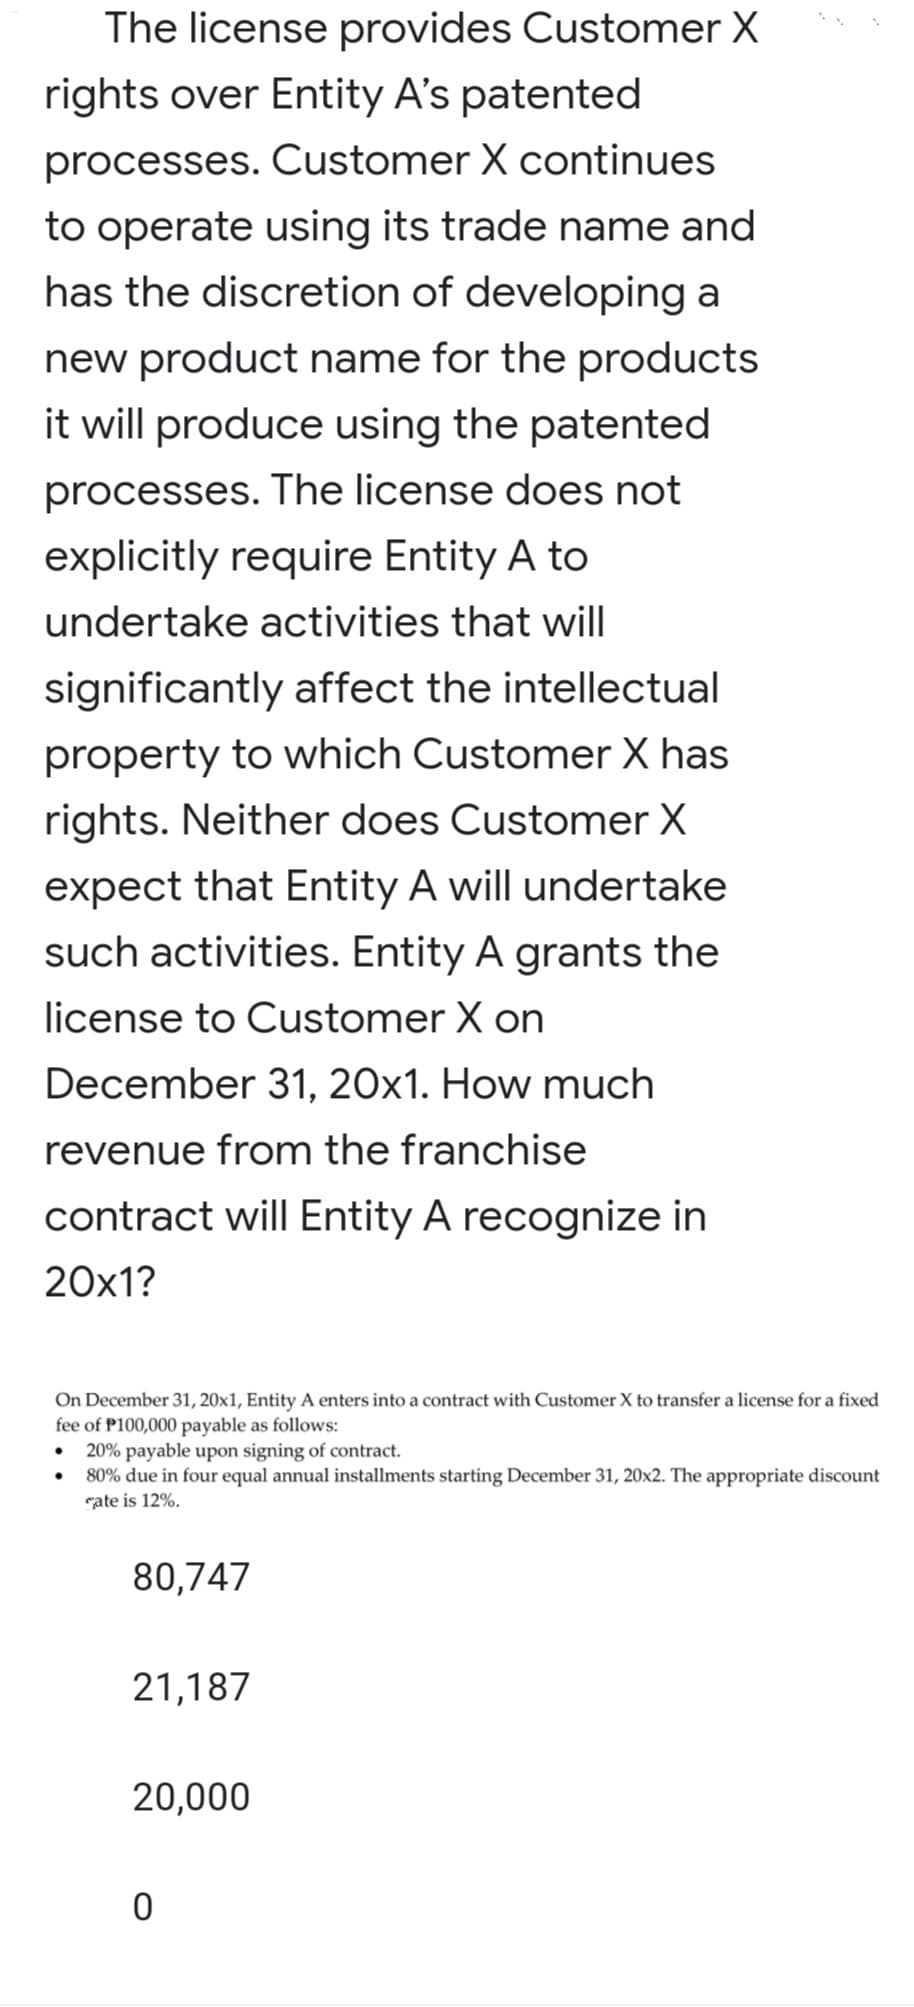 The license provides Customer X
rights over Entity A's patented
processes. Customer X continues
to operate using its trade name and
has the discretion of developing a
new product name for the products
it will produce using the patented
processes. The license does not
explicitly require Entity A to
undertake activities that will
significantly affect the intellectual
property to which Customer X has
rights. Neither does Customer X
expect that Entity A will undertake
such activities. Entity A grants the
license to Customer X on
December 31, 20x1. How much
revenue from the franchise
contract will Entity A recognize in
20x1?
On December 31, 20x1, Entity A enters into a contract with Customer X to transfer a license for a fixed
fee of P100,000 payable as follows:
20% payable upon signing of contract.
80% due in four equal annual installments starting December 31, 20x2. The appropriate discount
rate is 12%.
•
80,747
21,187
20,000
